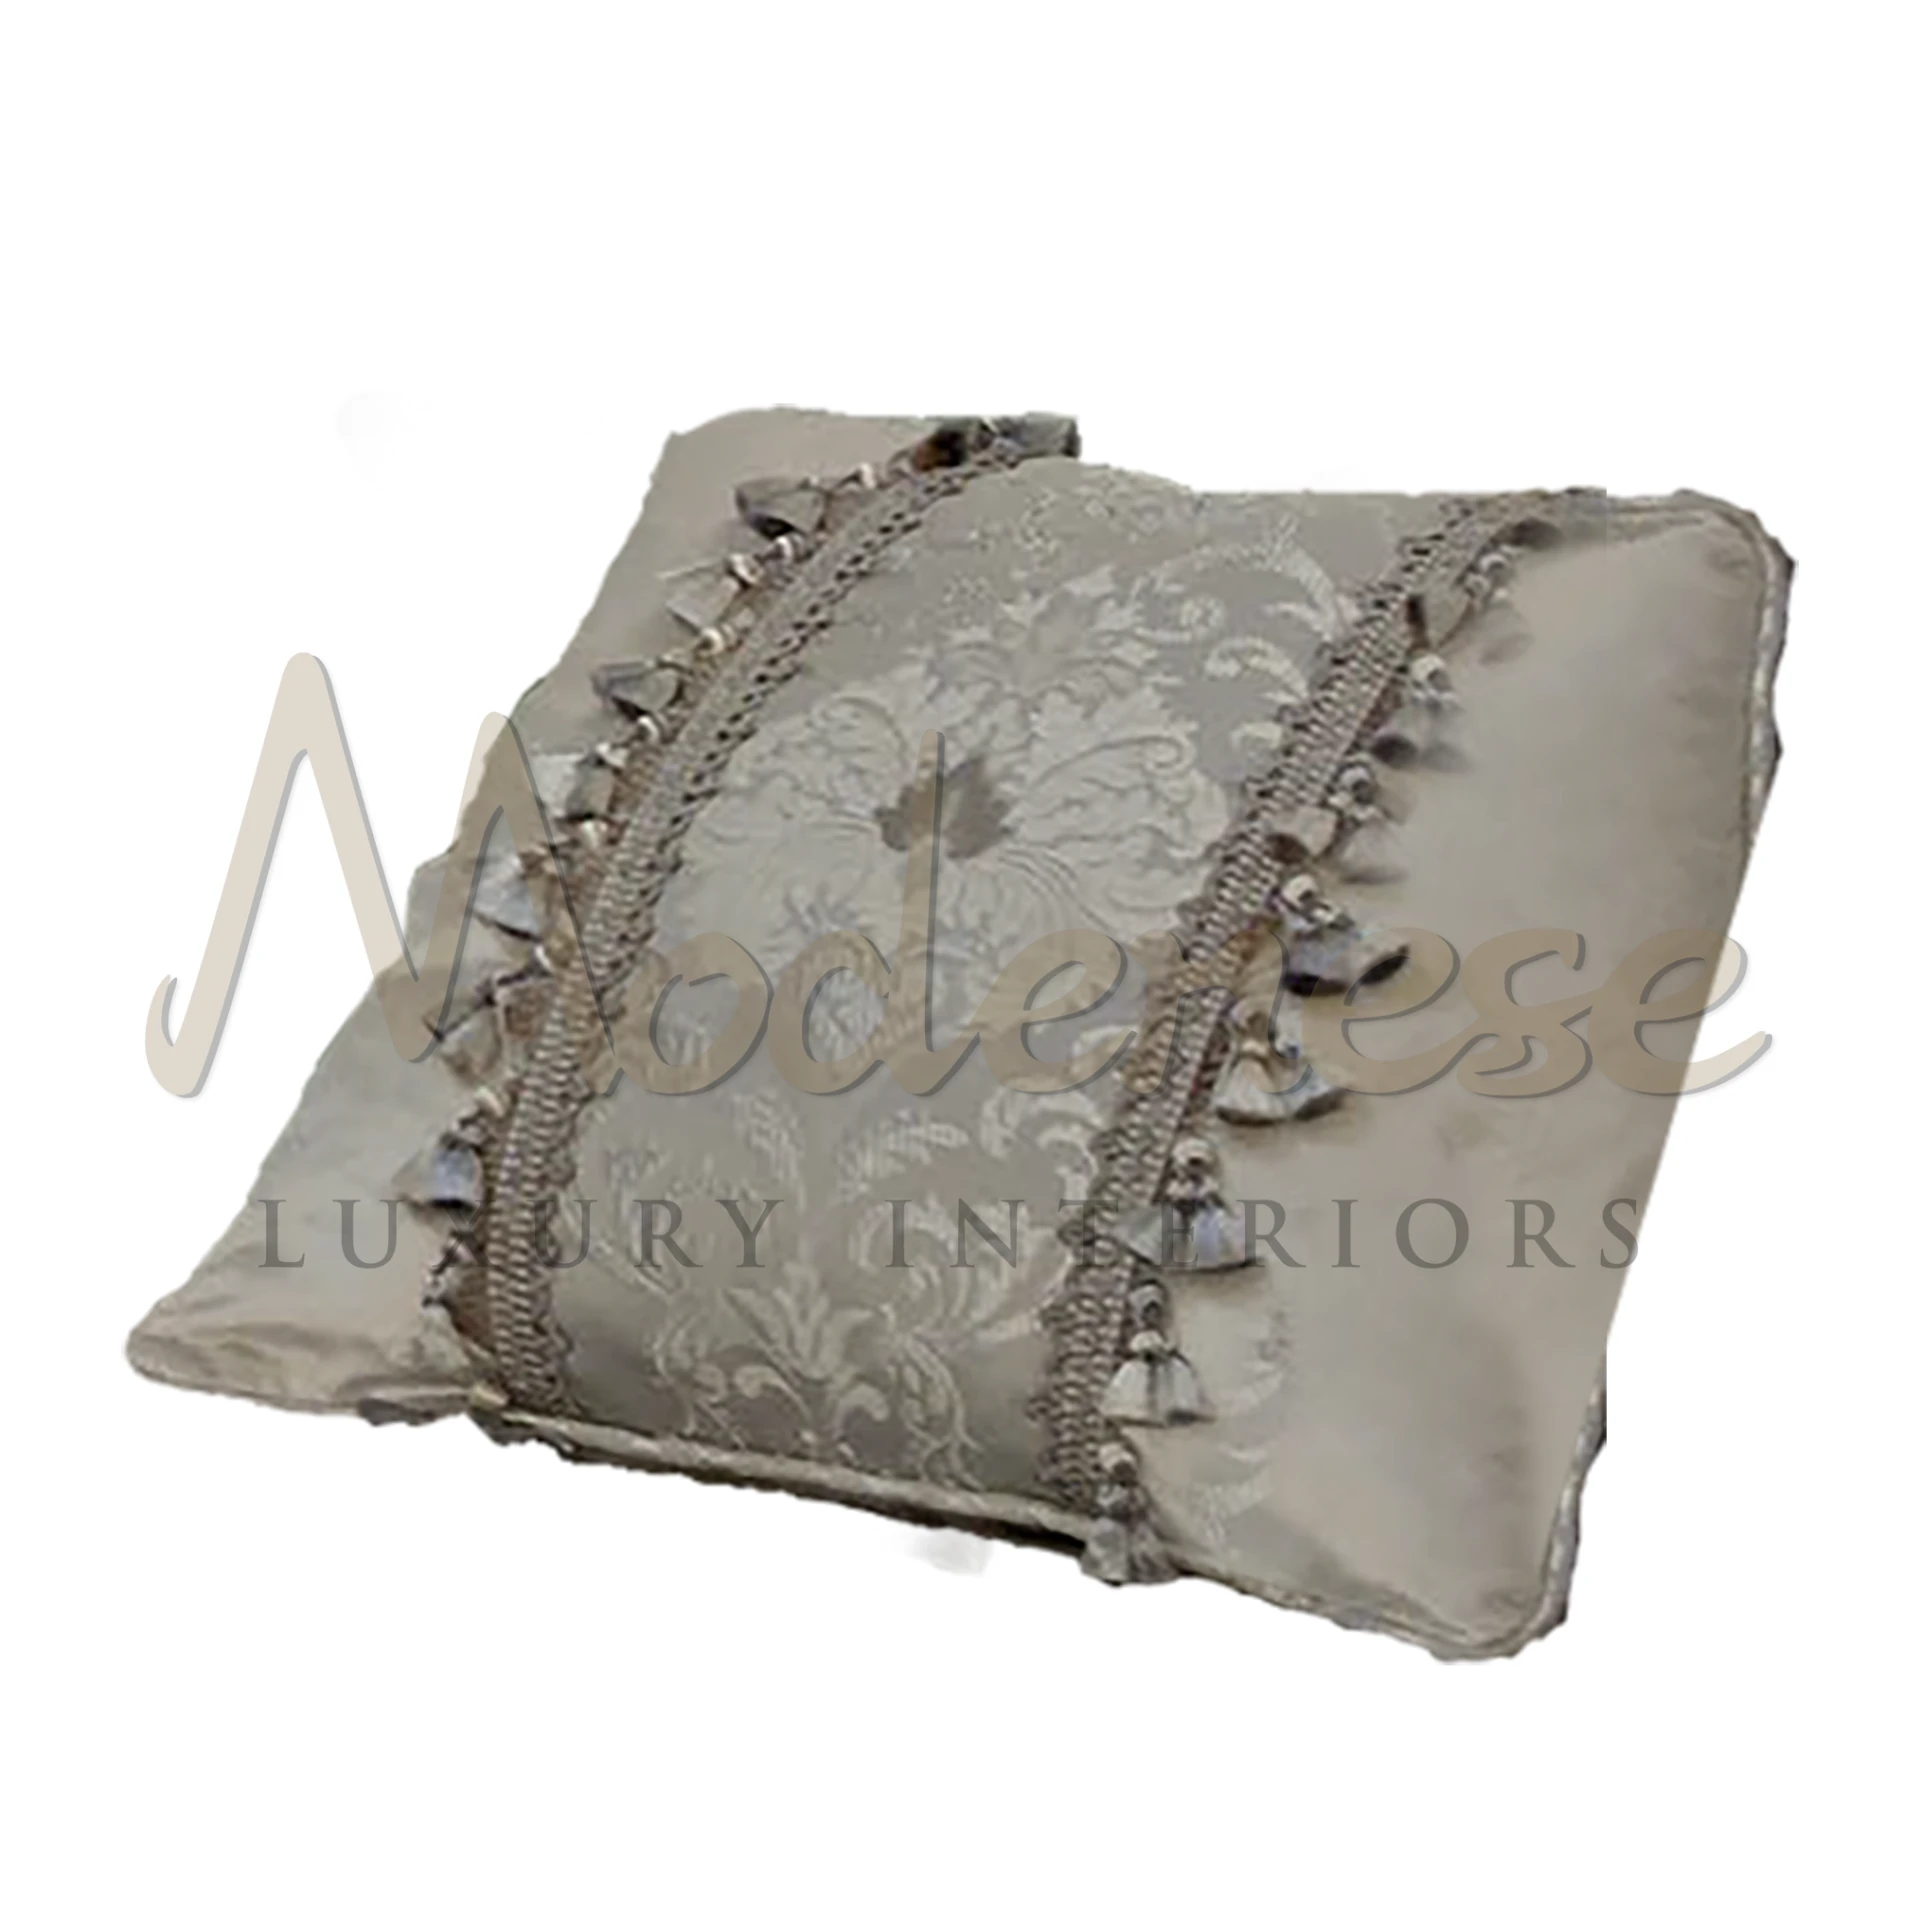 The Exquisite Luxury Pillow enhancing an exquisite bed, epitomizing refined beauty and transforming the bedroom's ambiance.